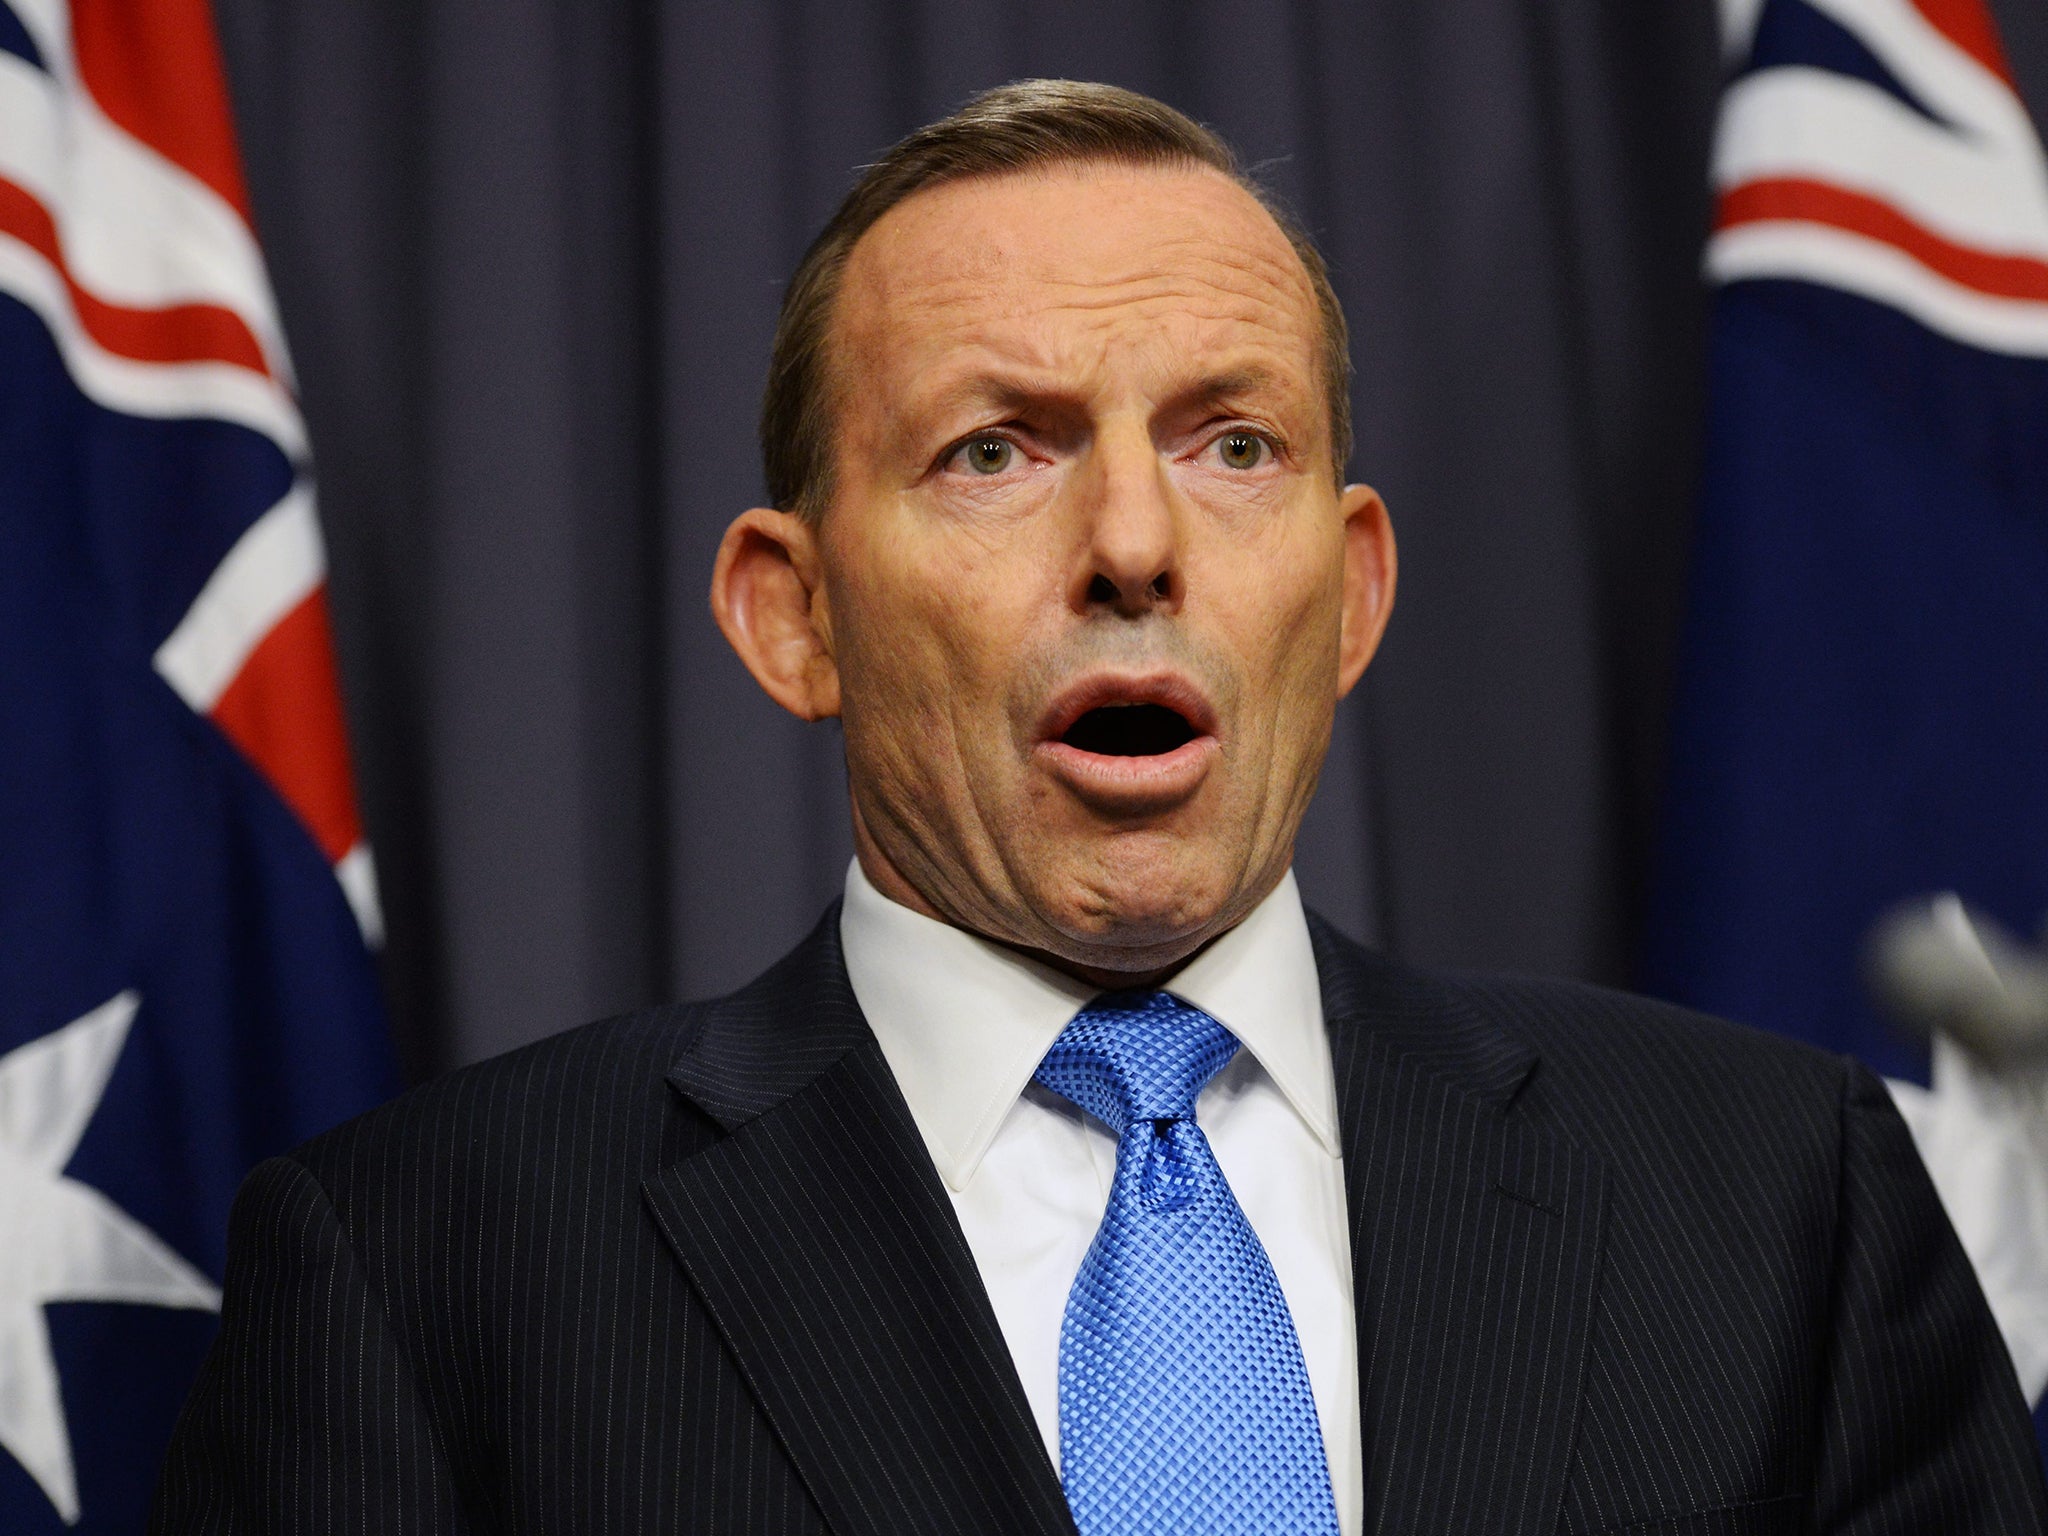 Tony Abbott's "nothing but bush" remark proved controversial